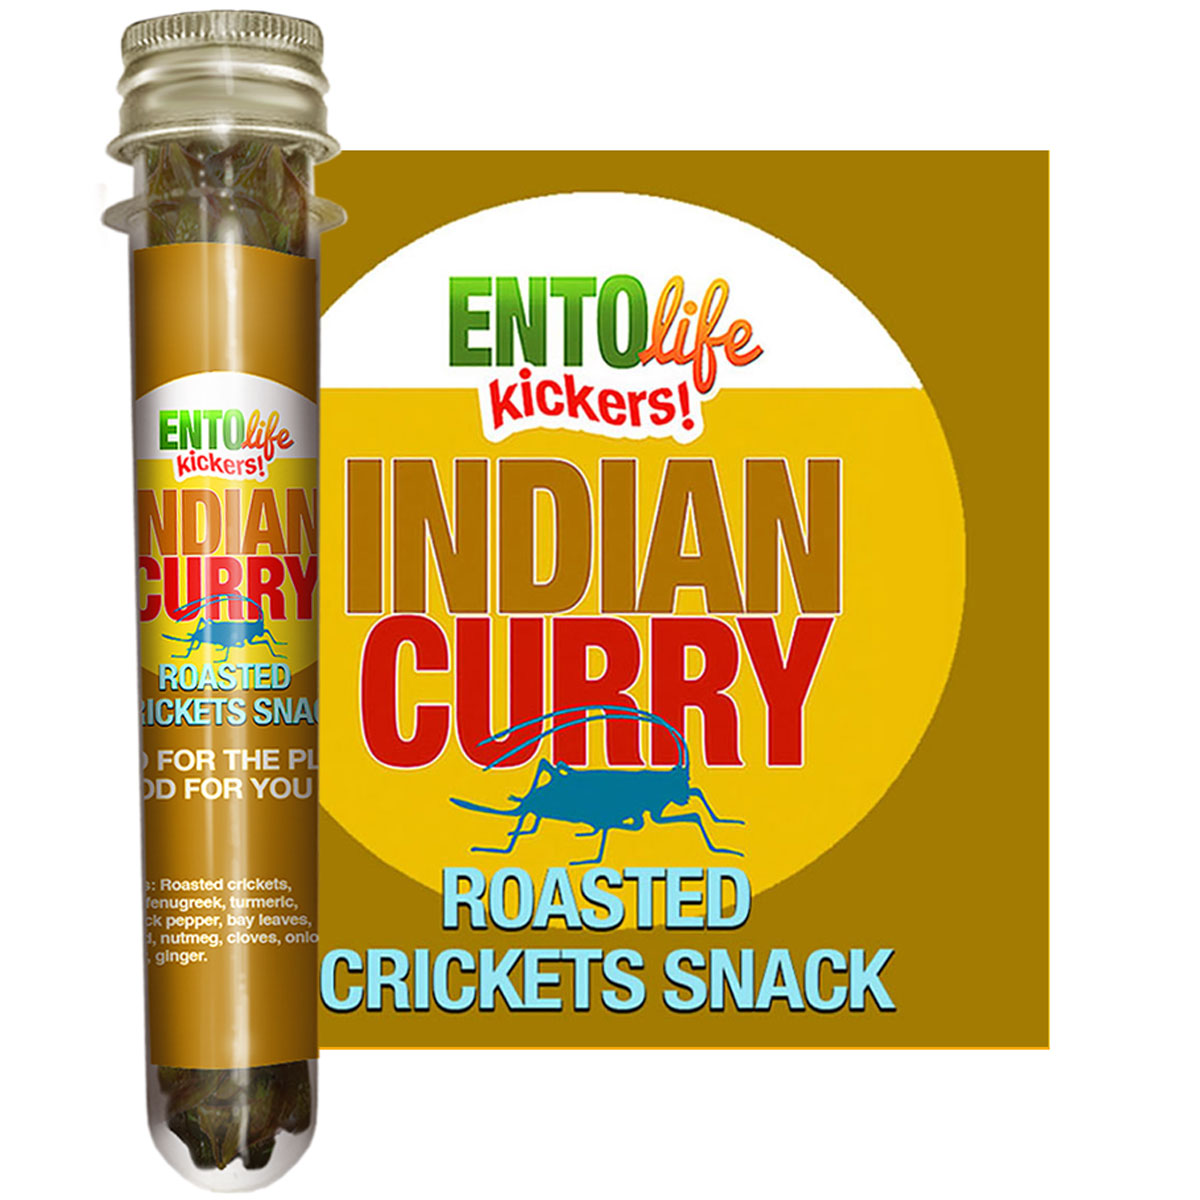 Indian Curry Flavored Crickets